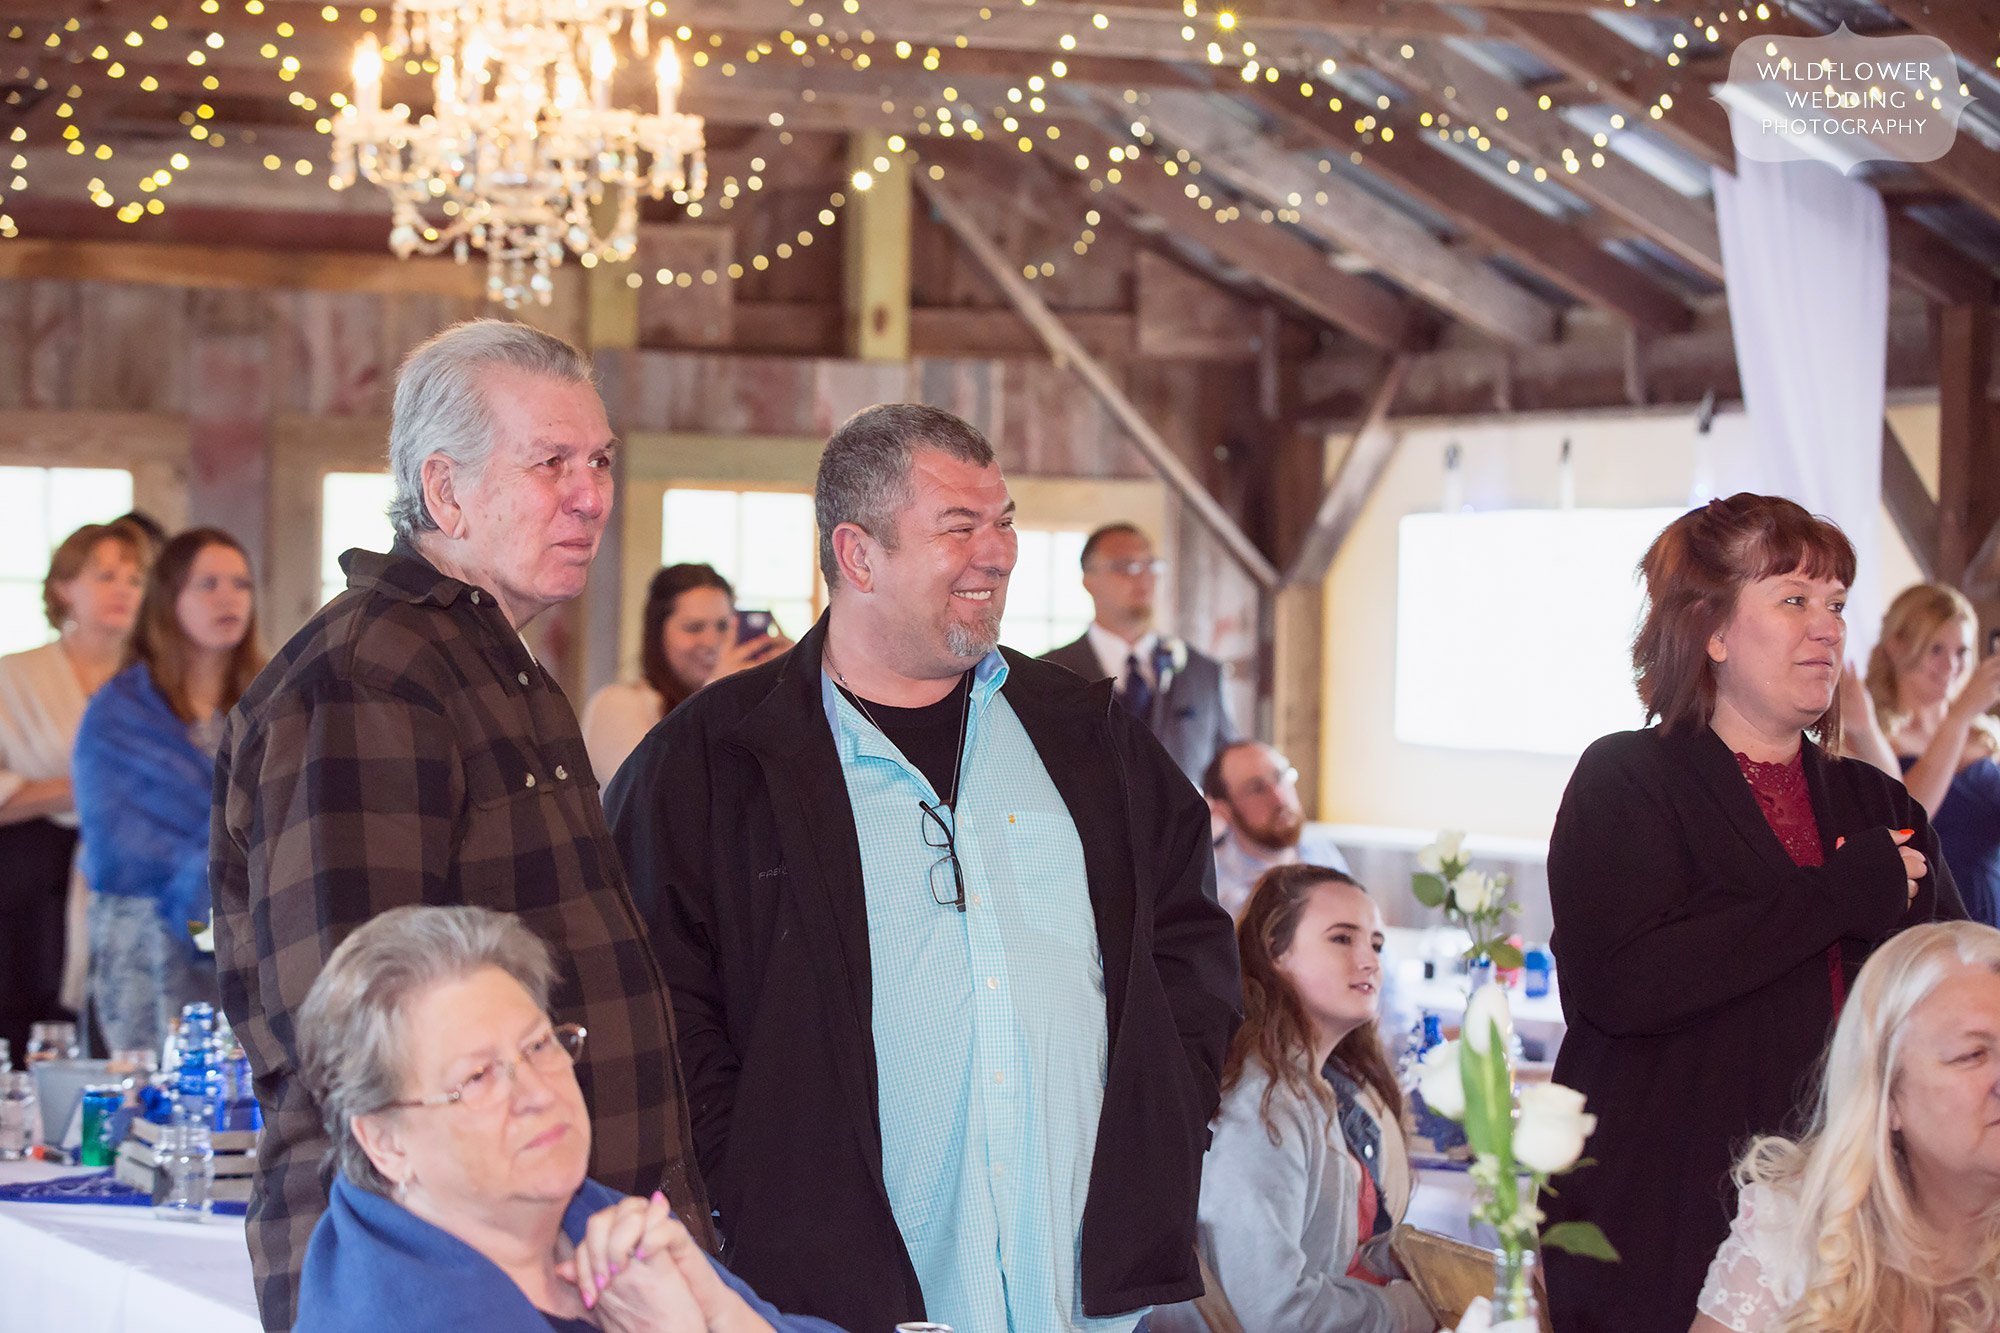 Wedding guests watch the first dance in the red barn in Weston.